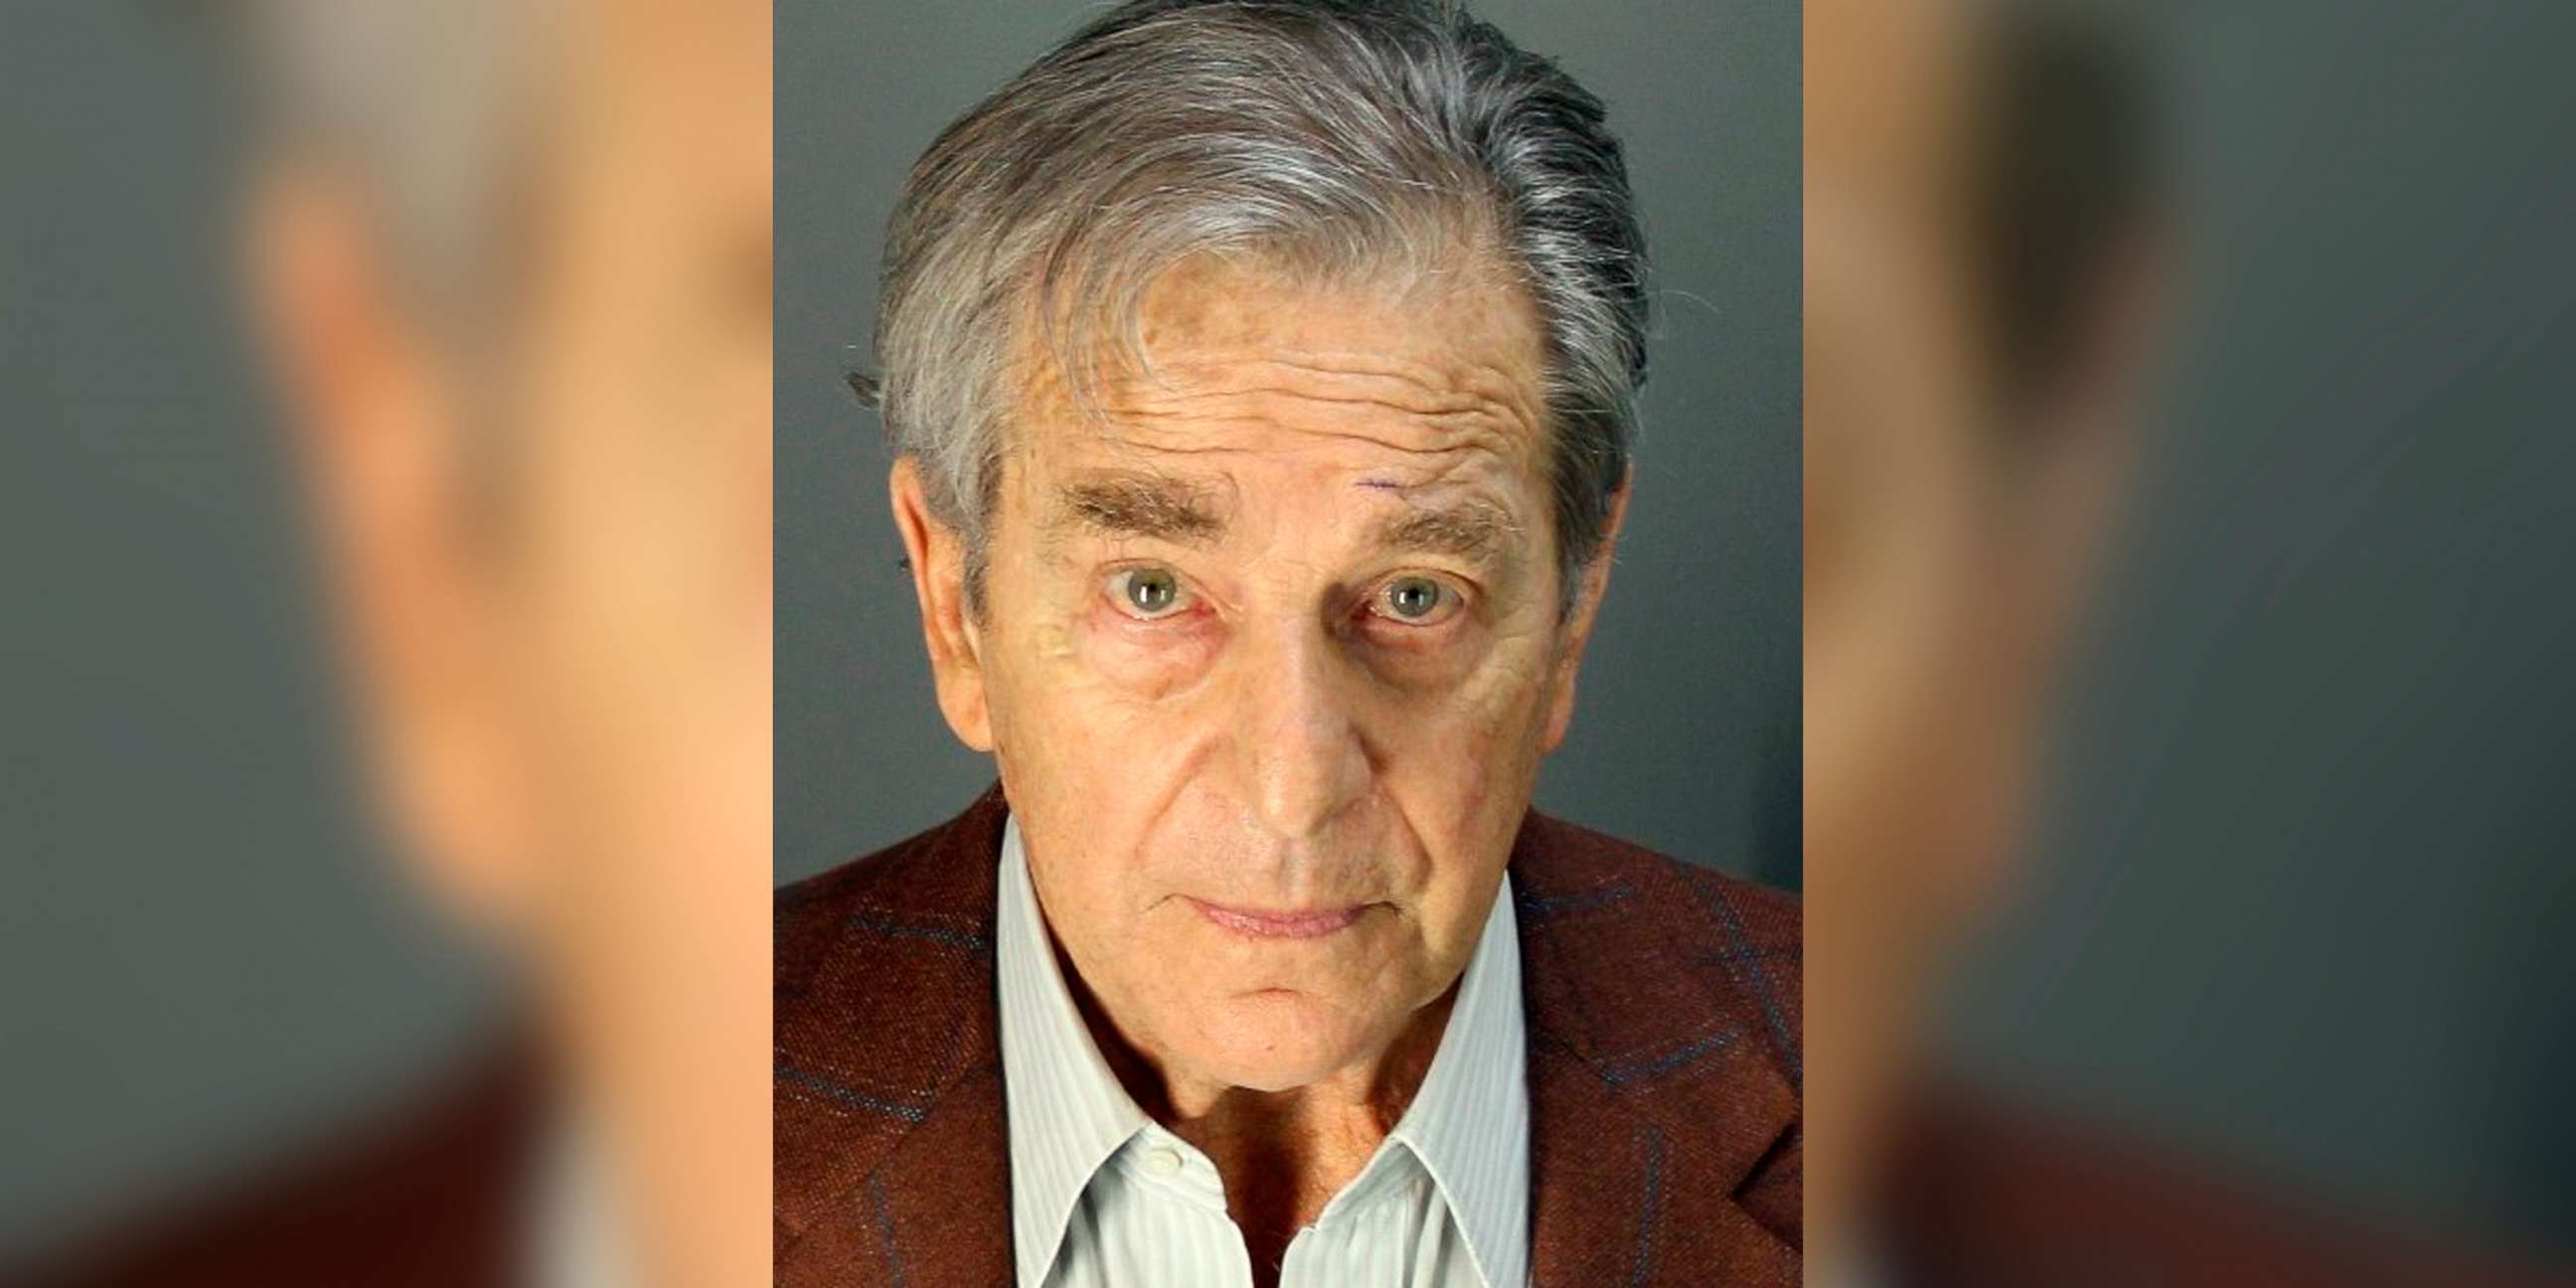 PHOTO: This booking photo provided by the Napa County Sheriff's Office shows Paul Pelosi on May 29, 2022, following his arrest on suspicion of DUI in Northern California.